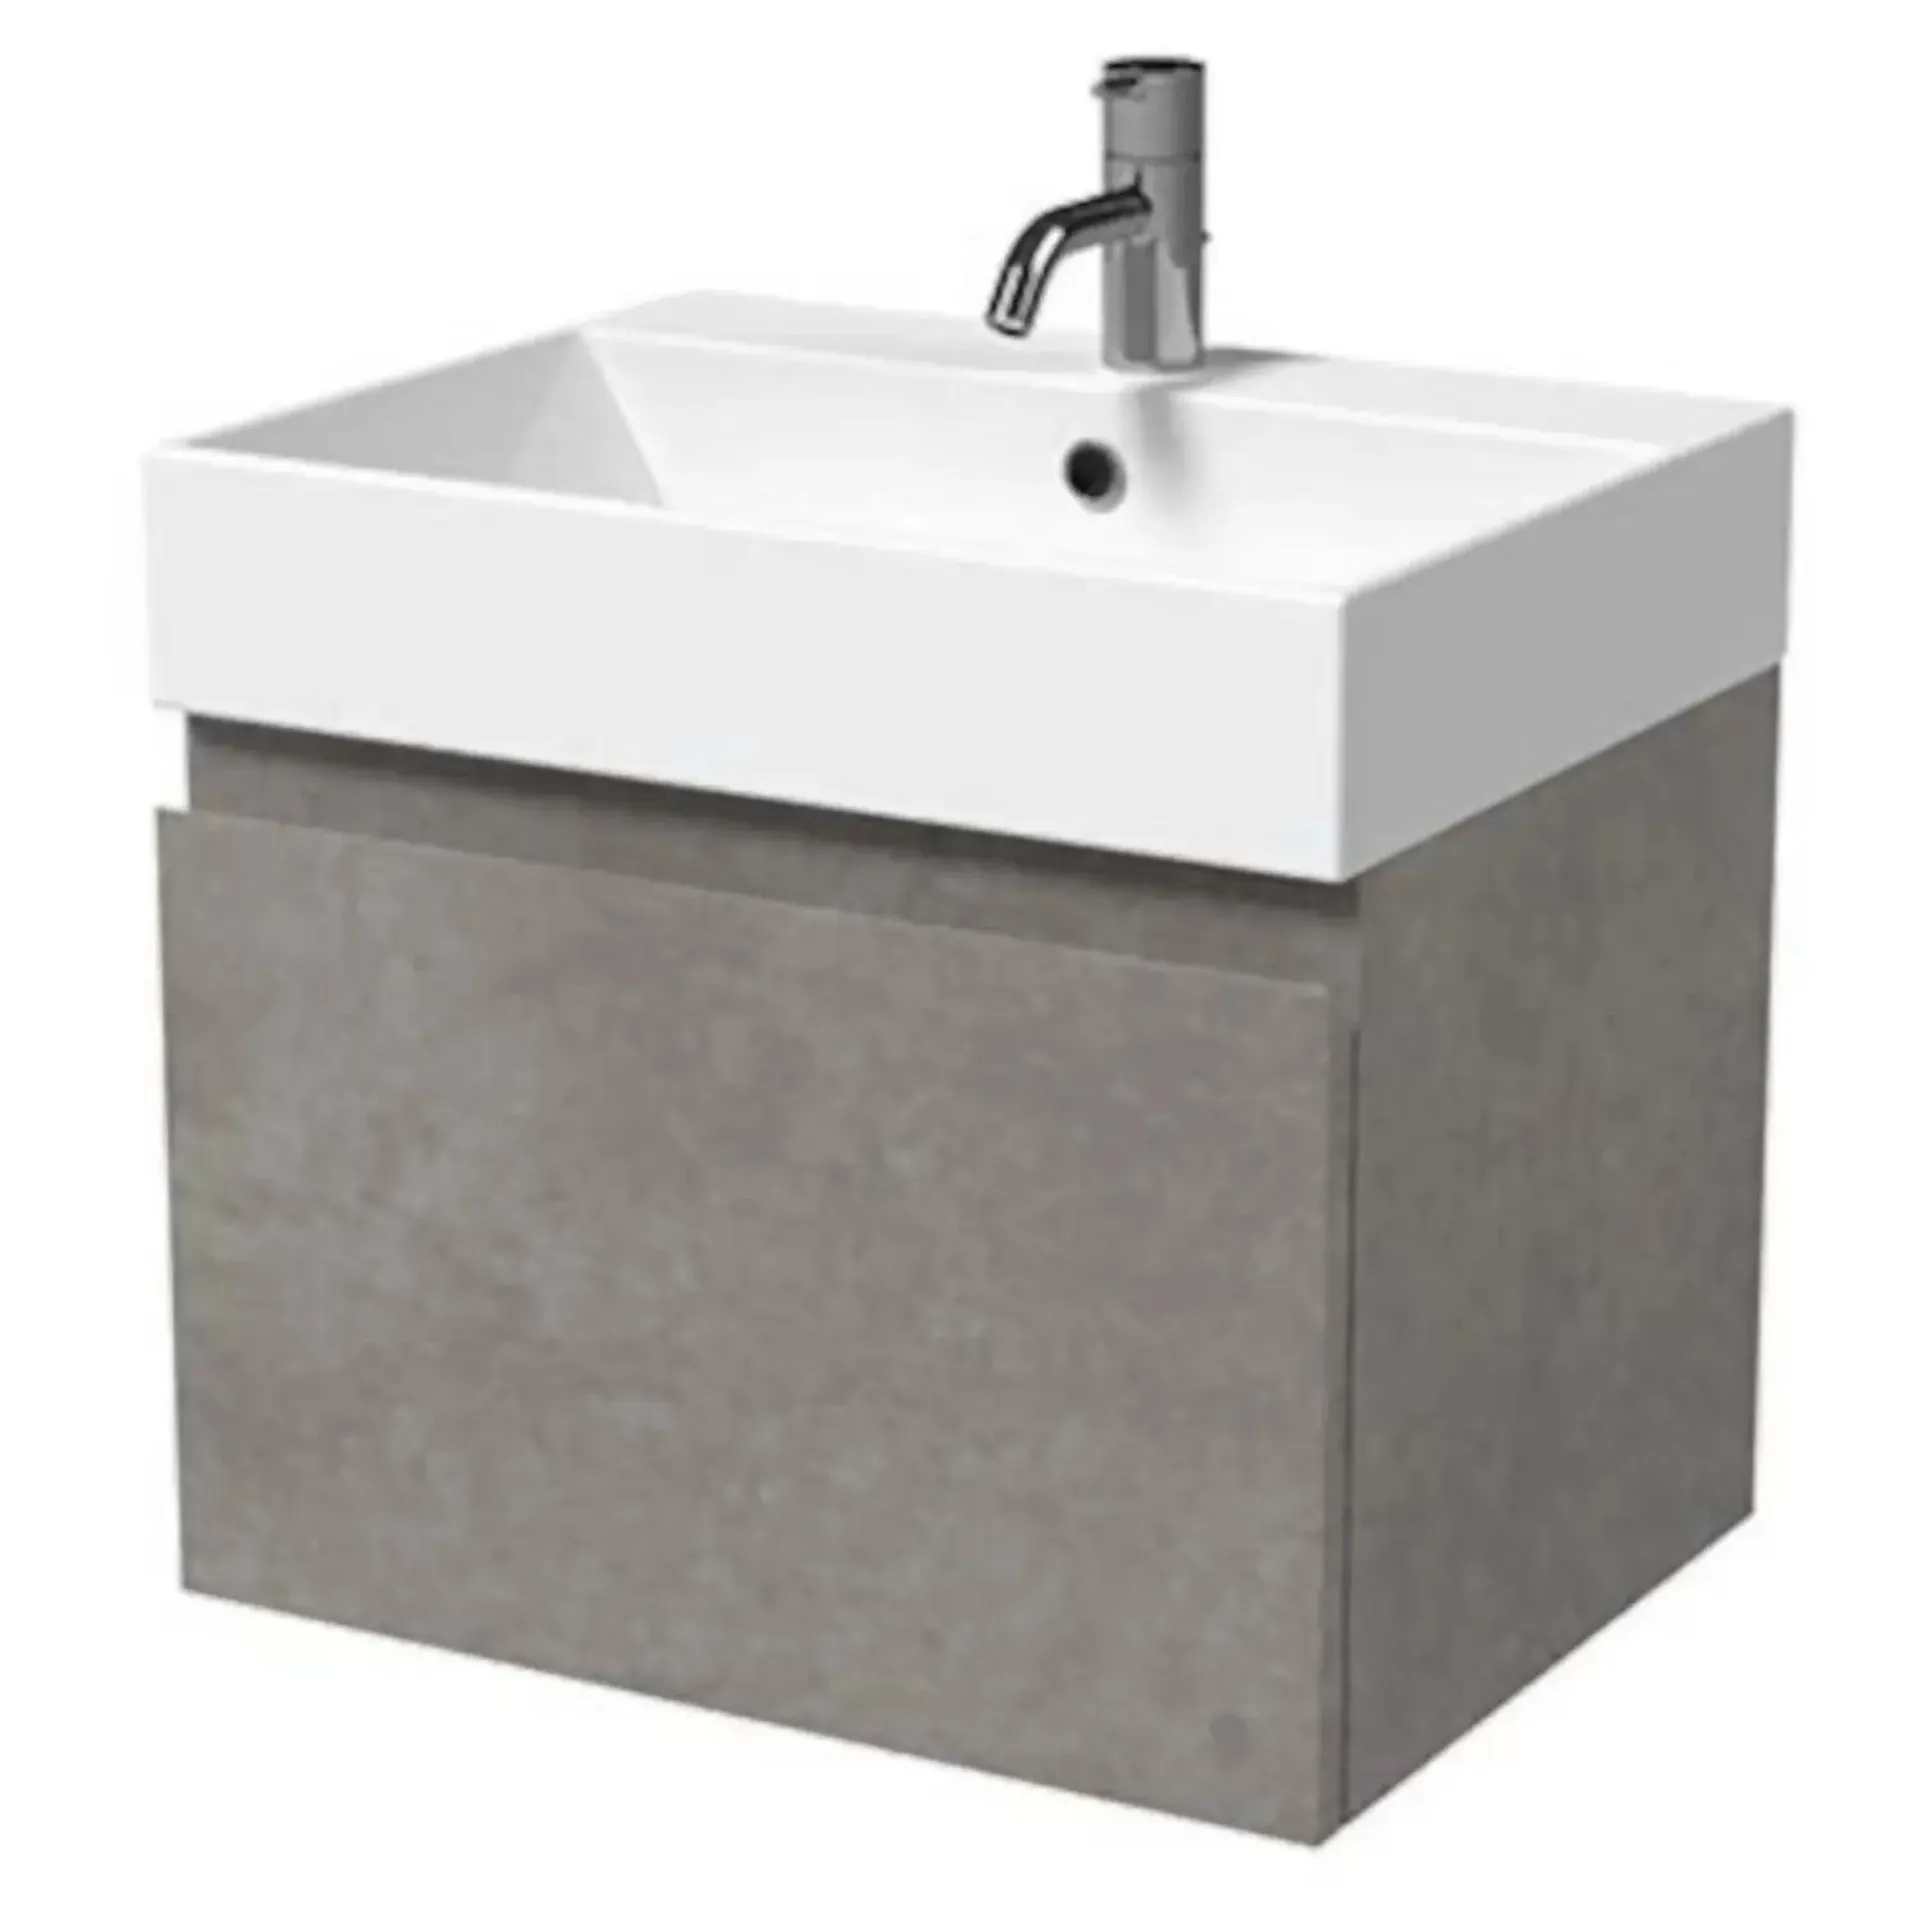 Mino 500mm Wall Hung Vanity Unit with Basin - Concrete